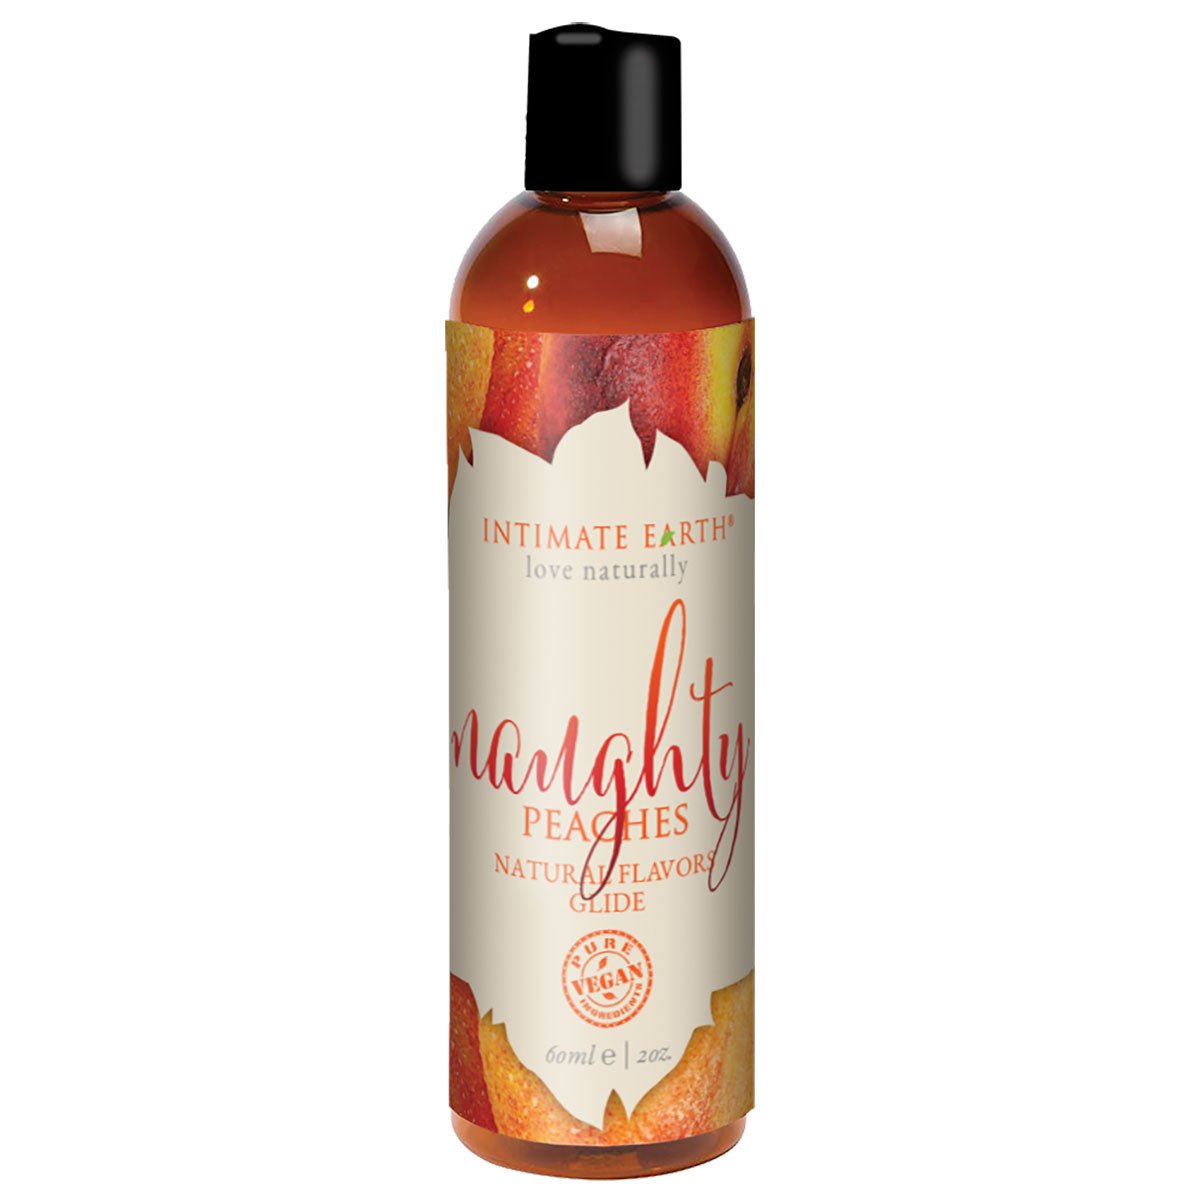 Intimate Earth Flavored Glide - Naughty Peaches 2oz Water Based Lube